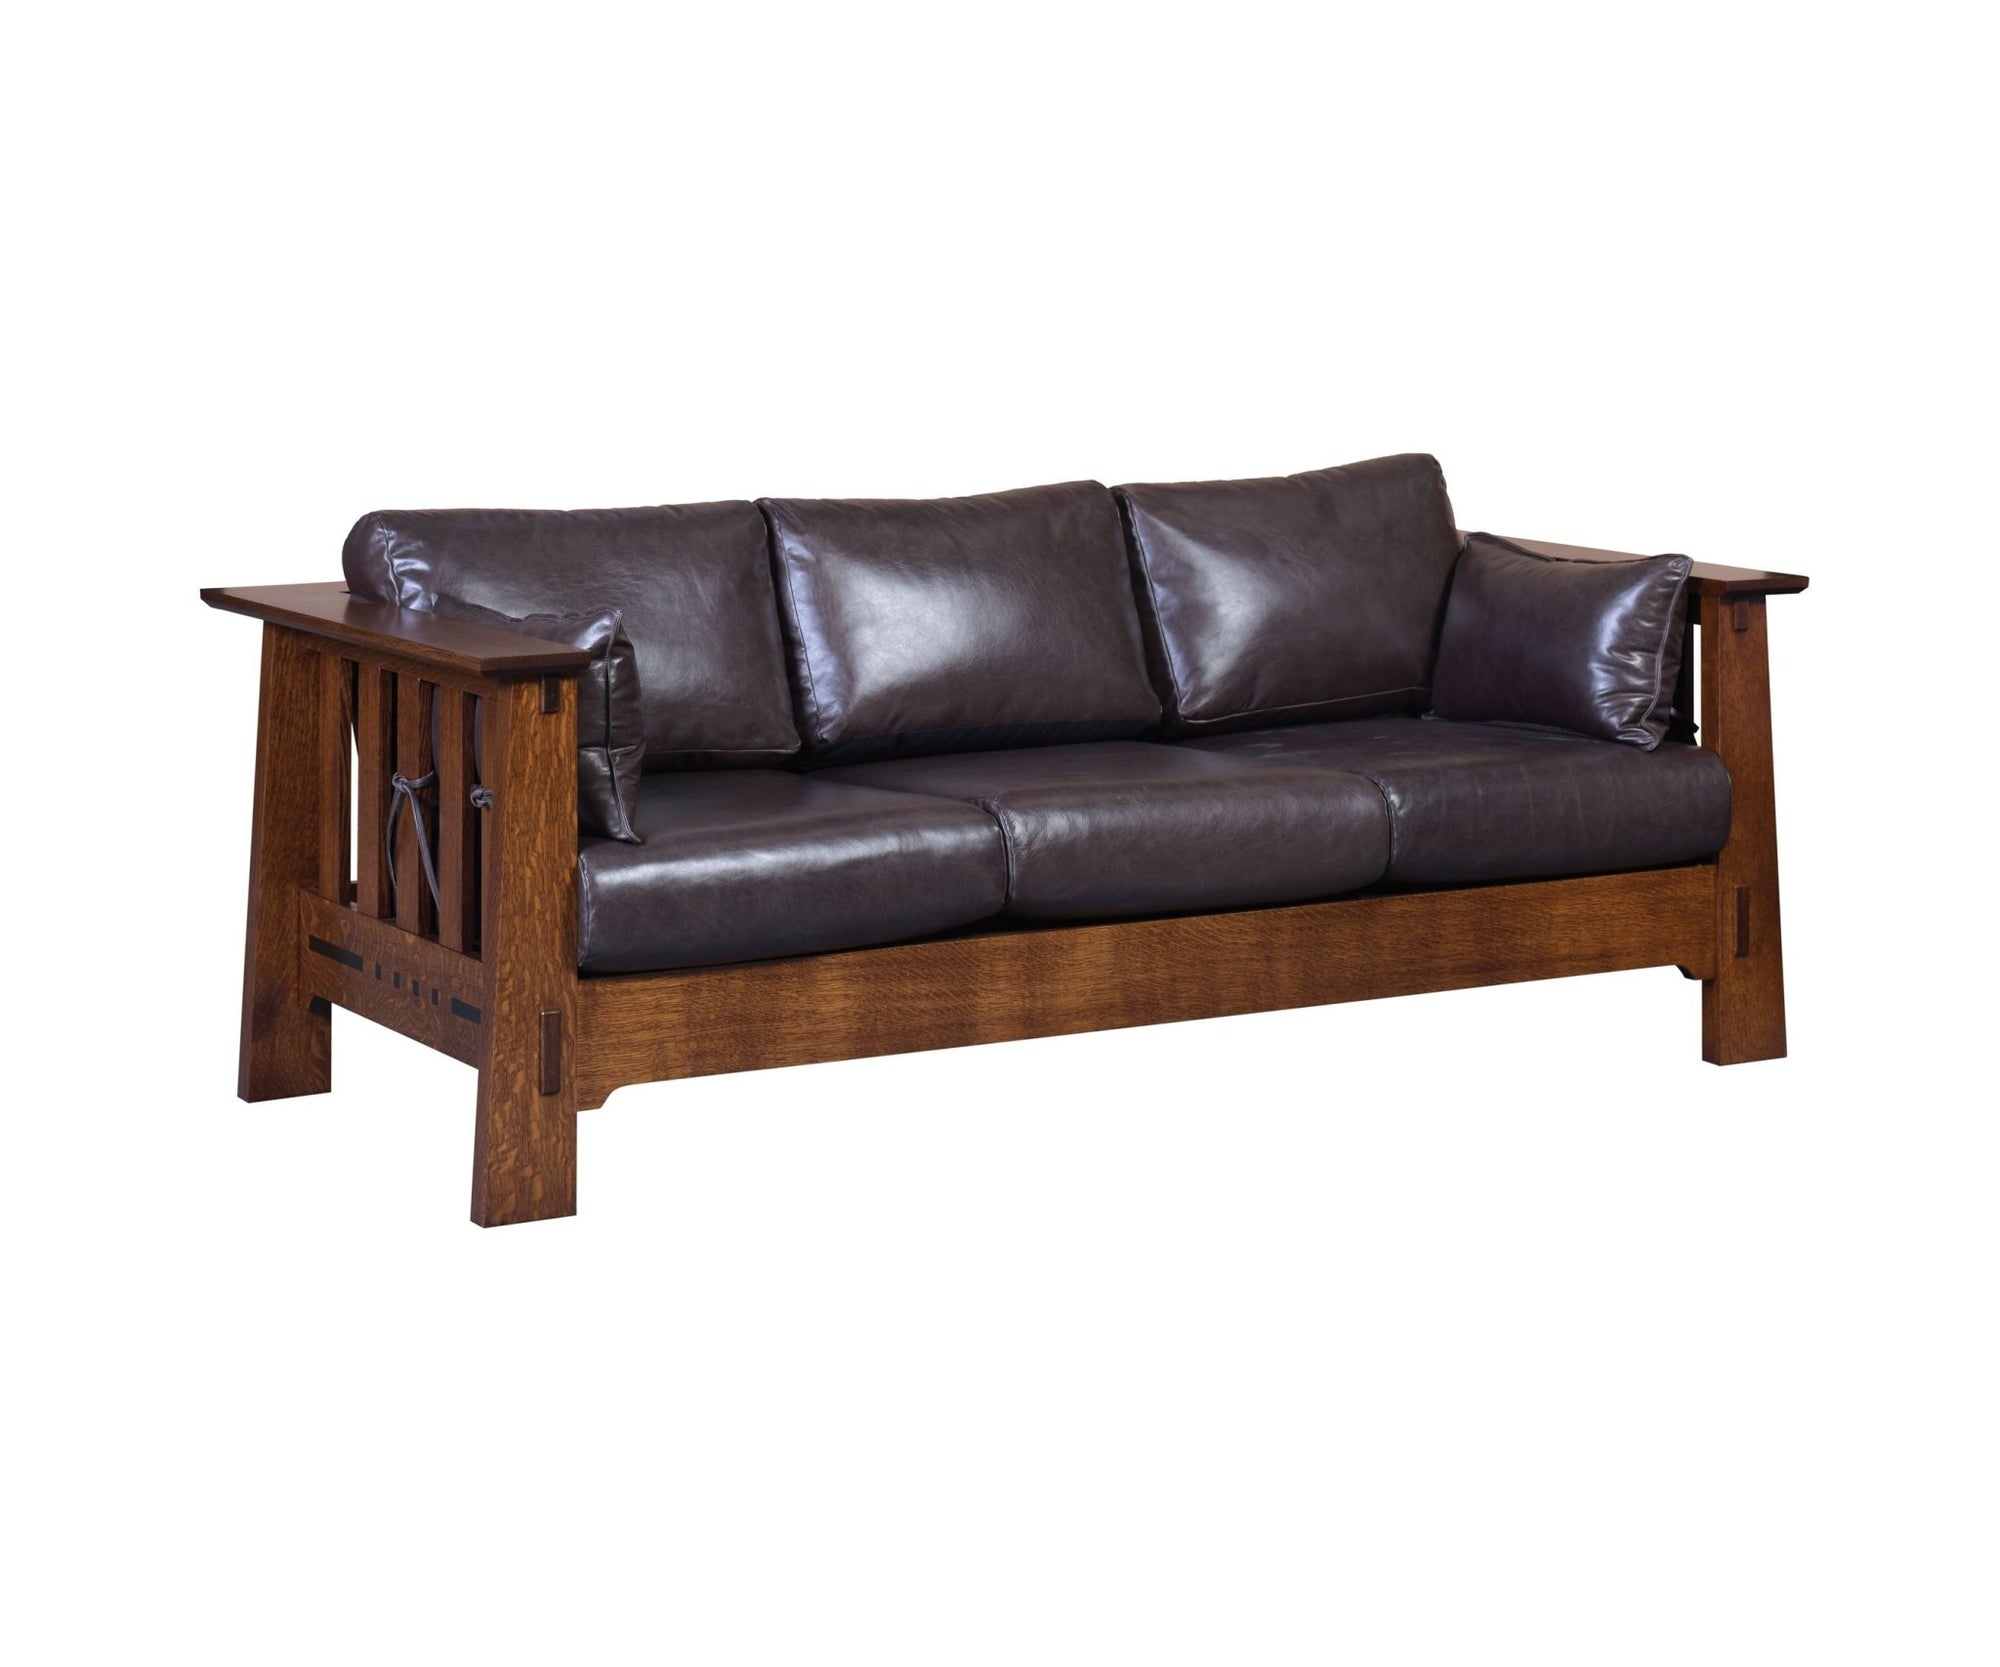 Amish Van Nuys Leather Morris Sofa & Table Living Room Set - snyders.furniture